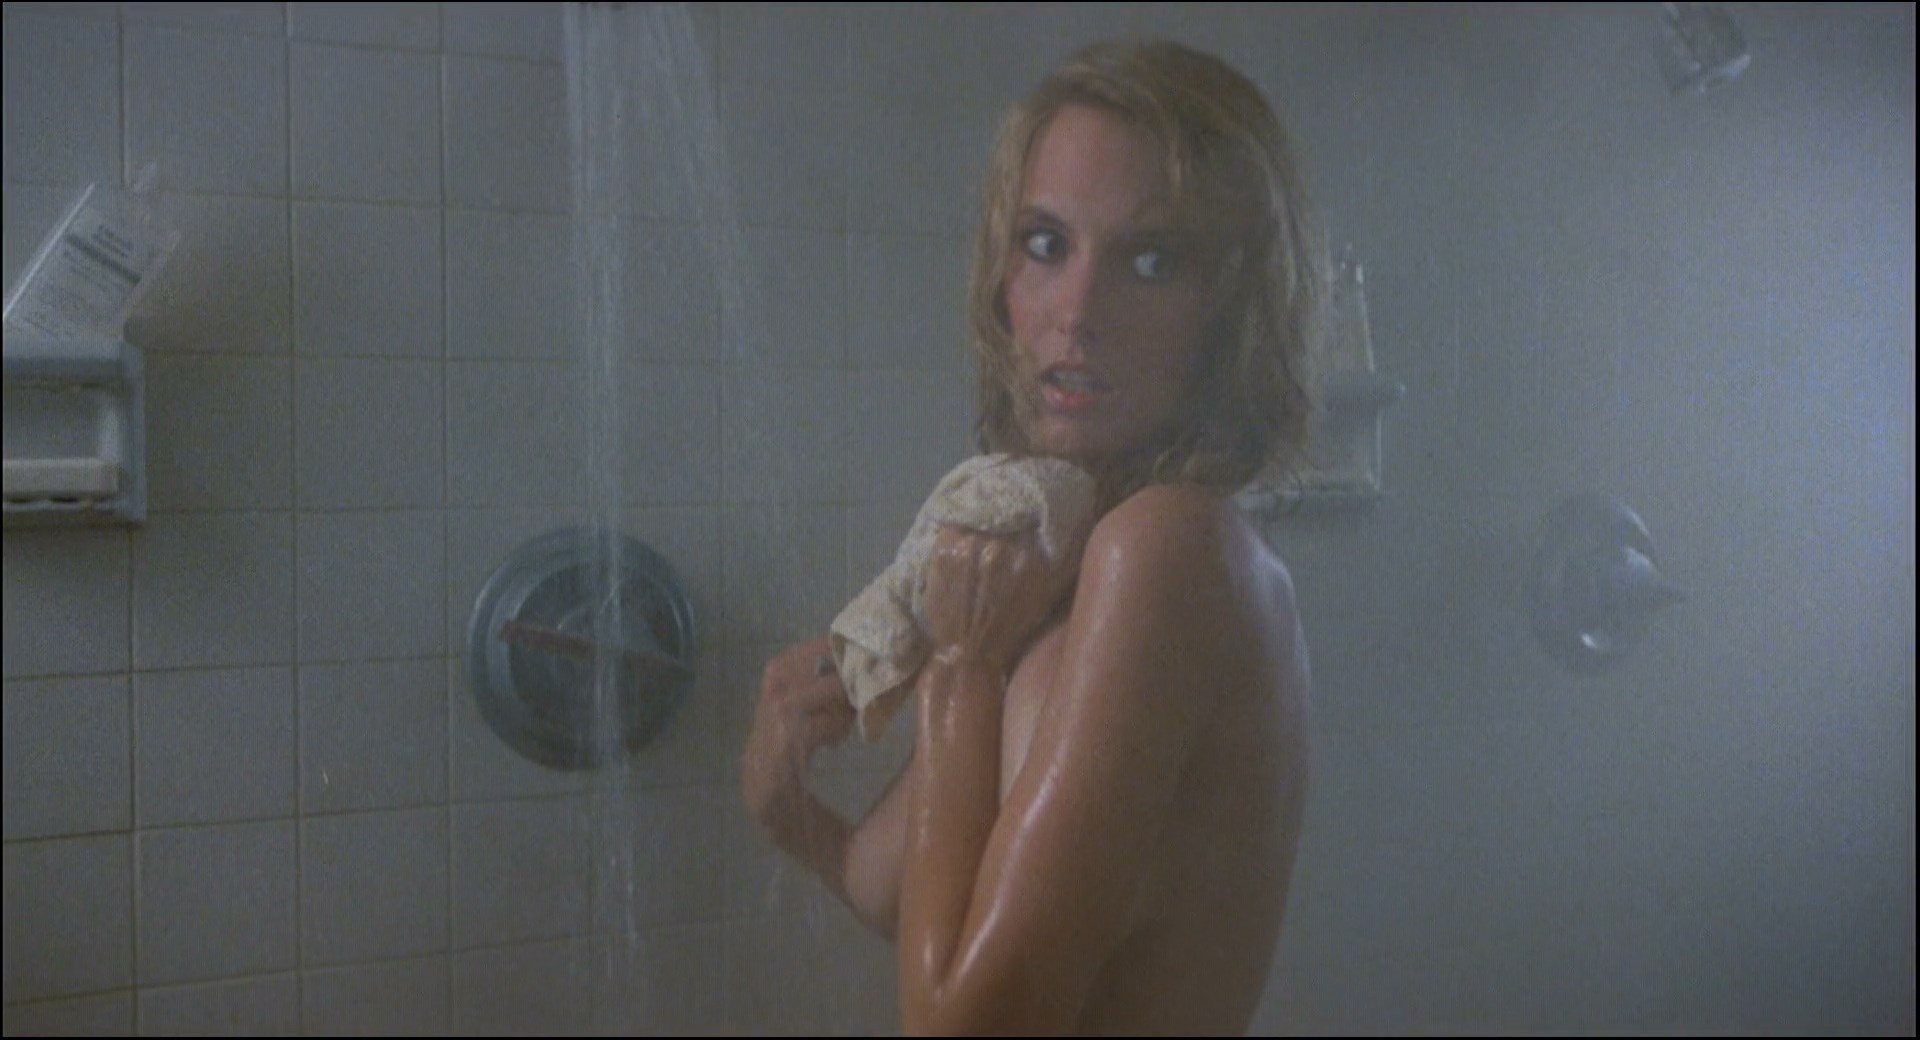 Topless Leslie Scarborough is taking a shower when so guy suprises her.